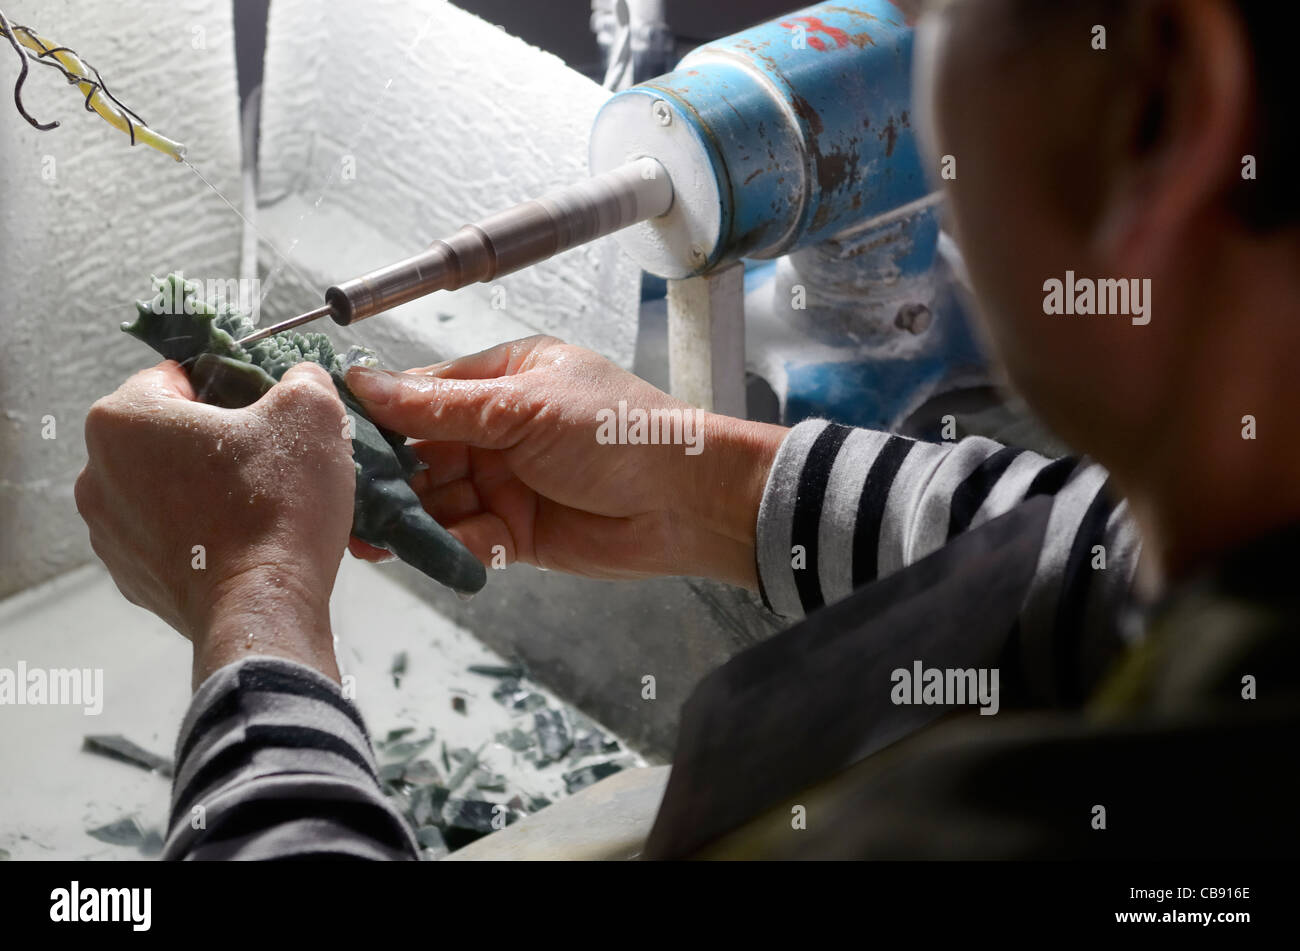 Craftsman carving jade stone with a water cooled diamond dremel drill in Beijing Peoples Republic of China Stock Photo